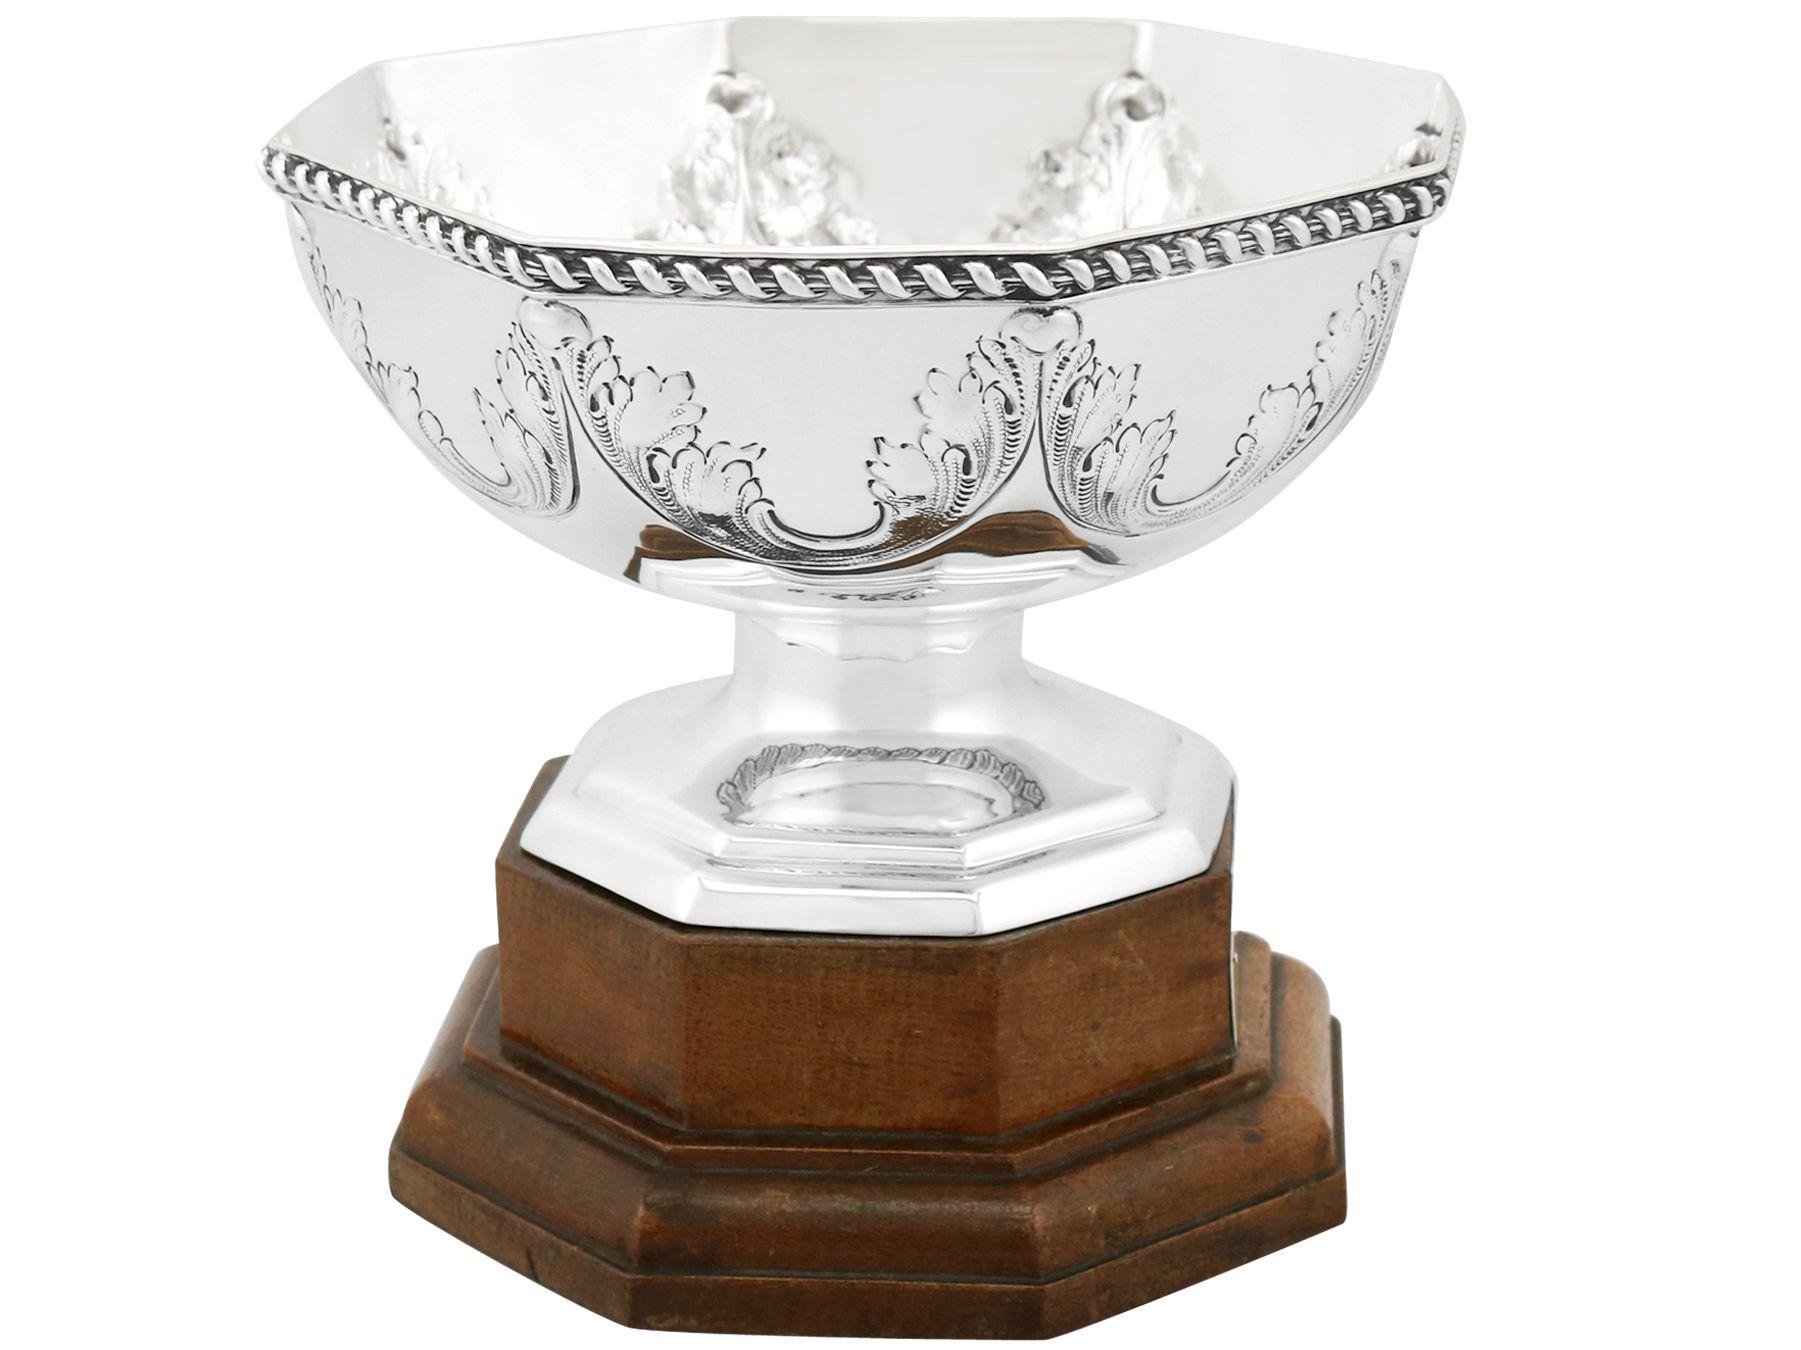 An exceptional, fine and impressive antique George V English sterling silver presentation bowl on plinth; an addition to our ornamental silverware collection.

This exceptional antique George V sterling silver presentation bowl has an octagonal,